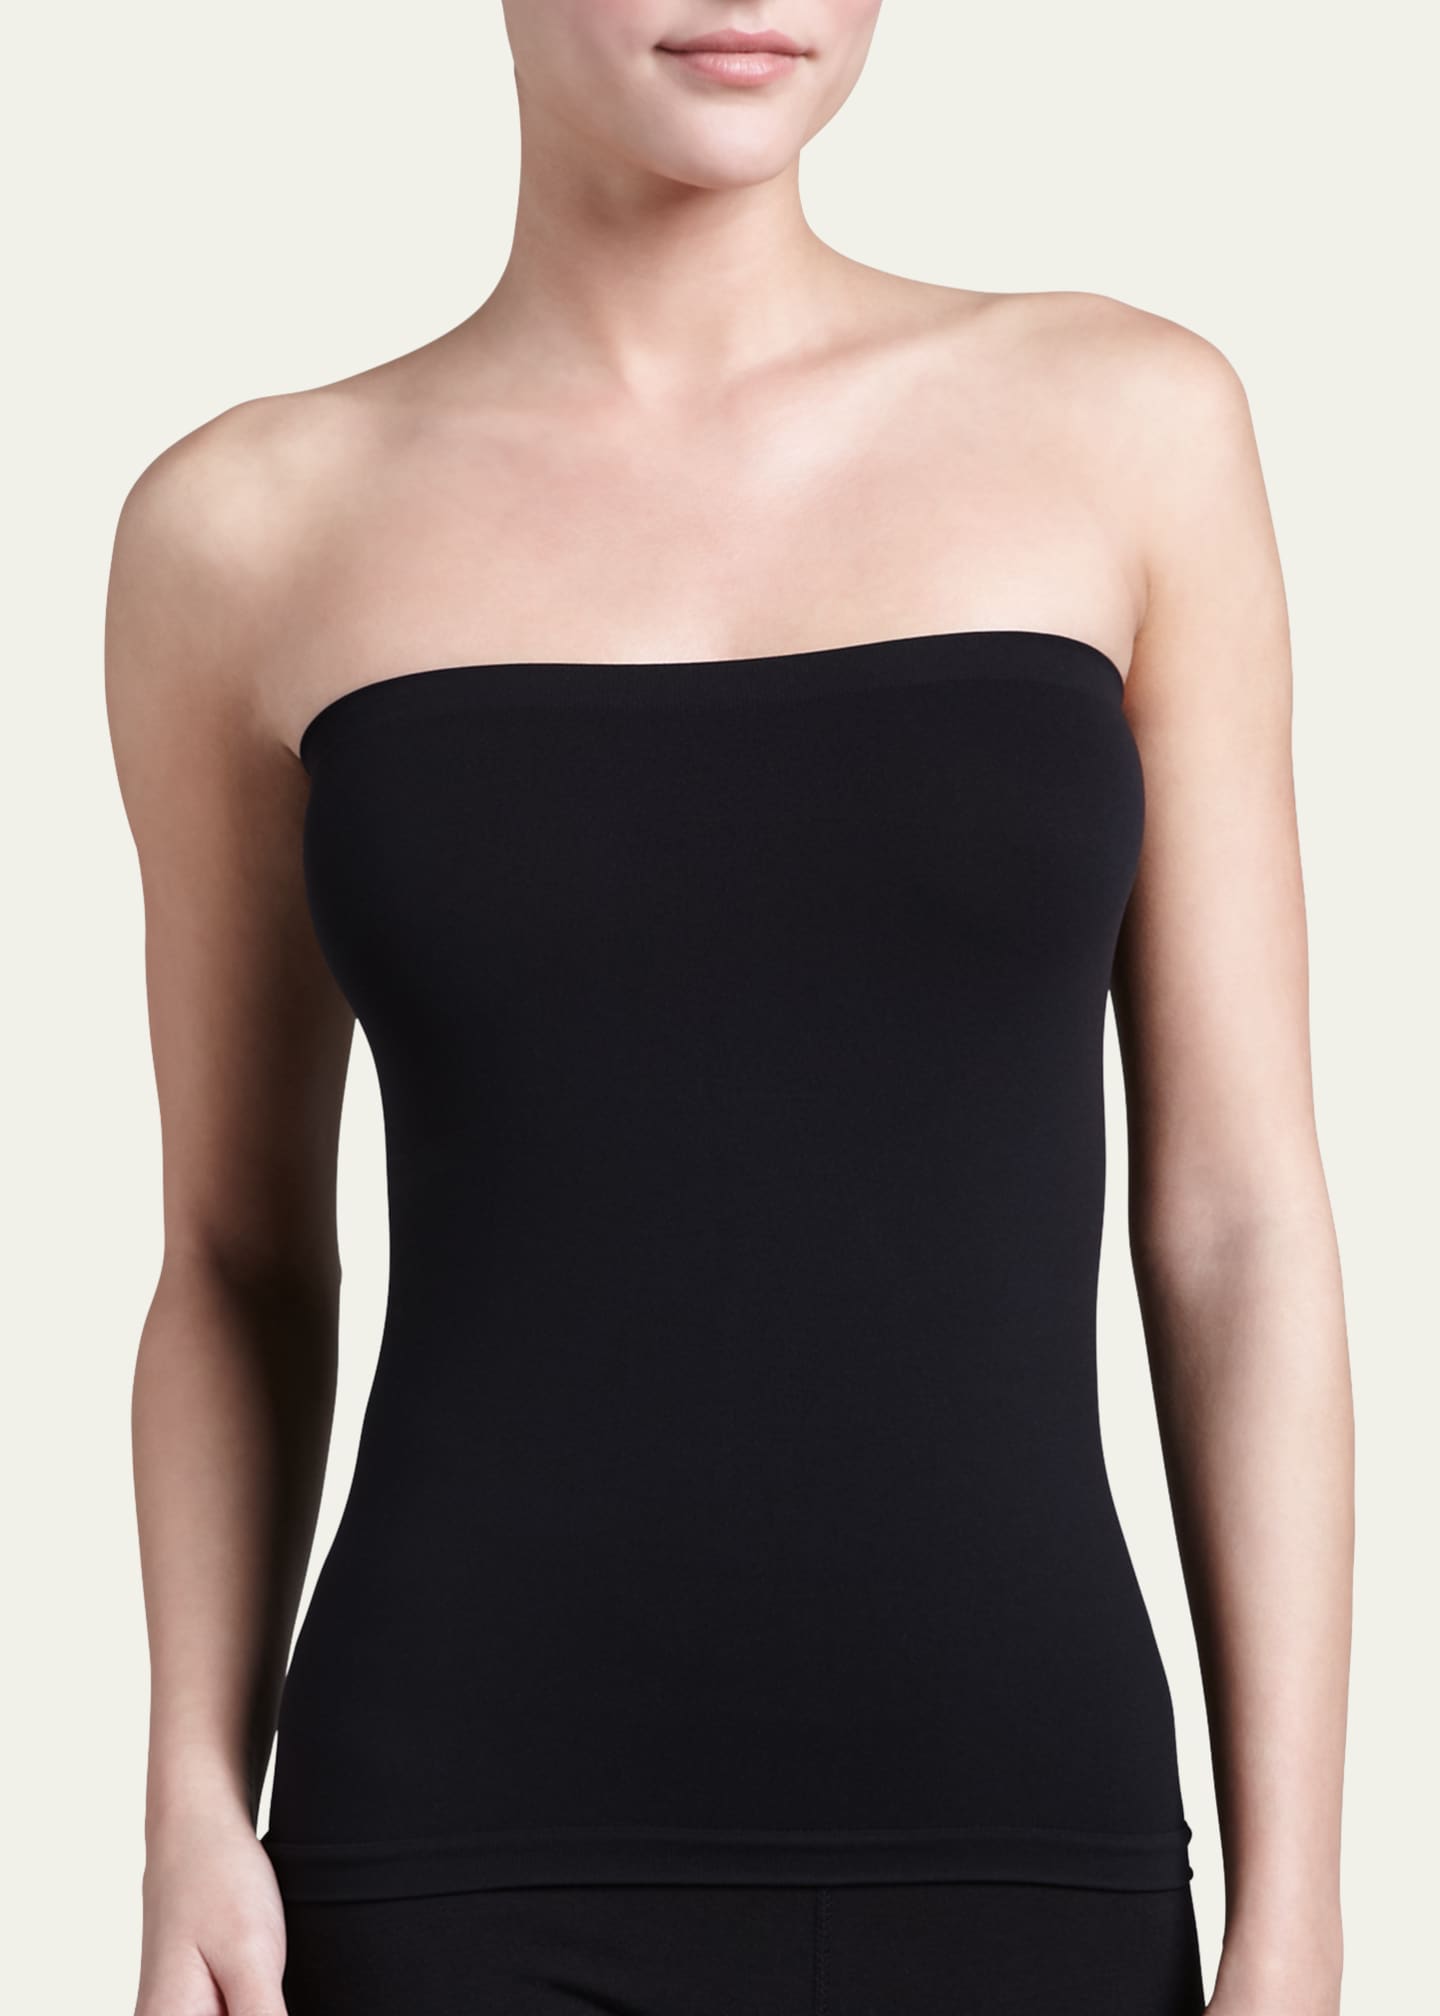 Wolford Fatal Strapless Top Image 1 of 4